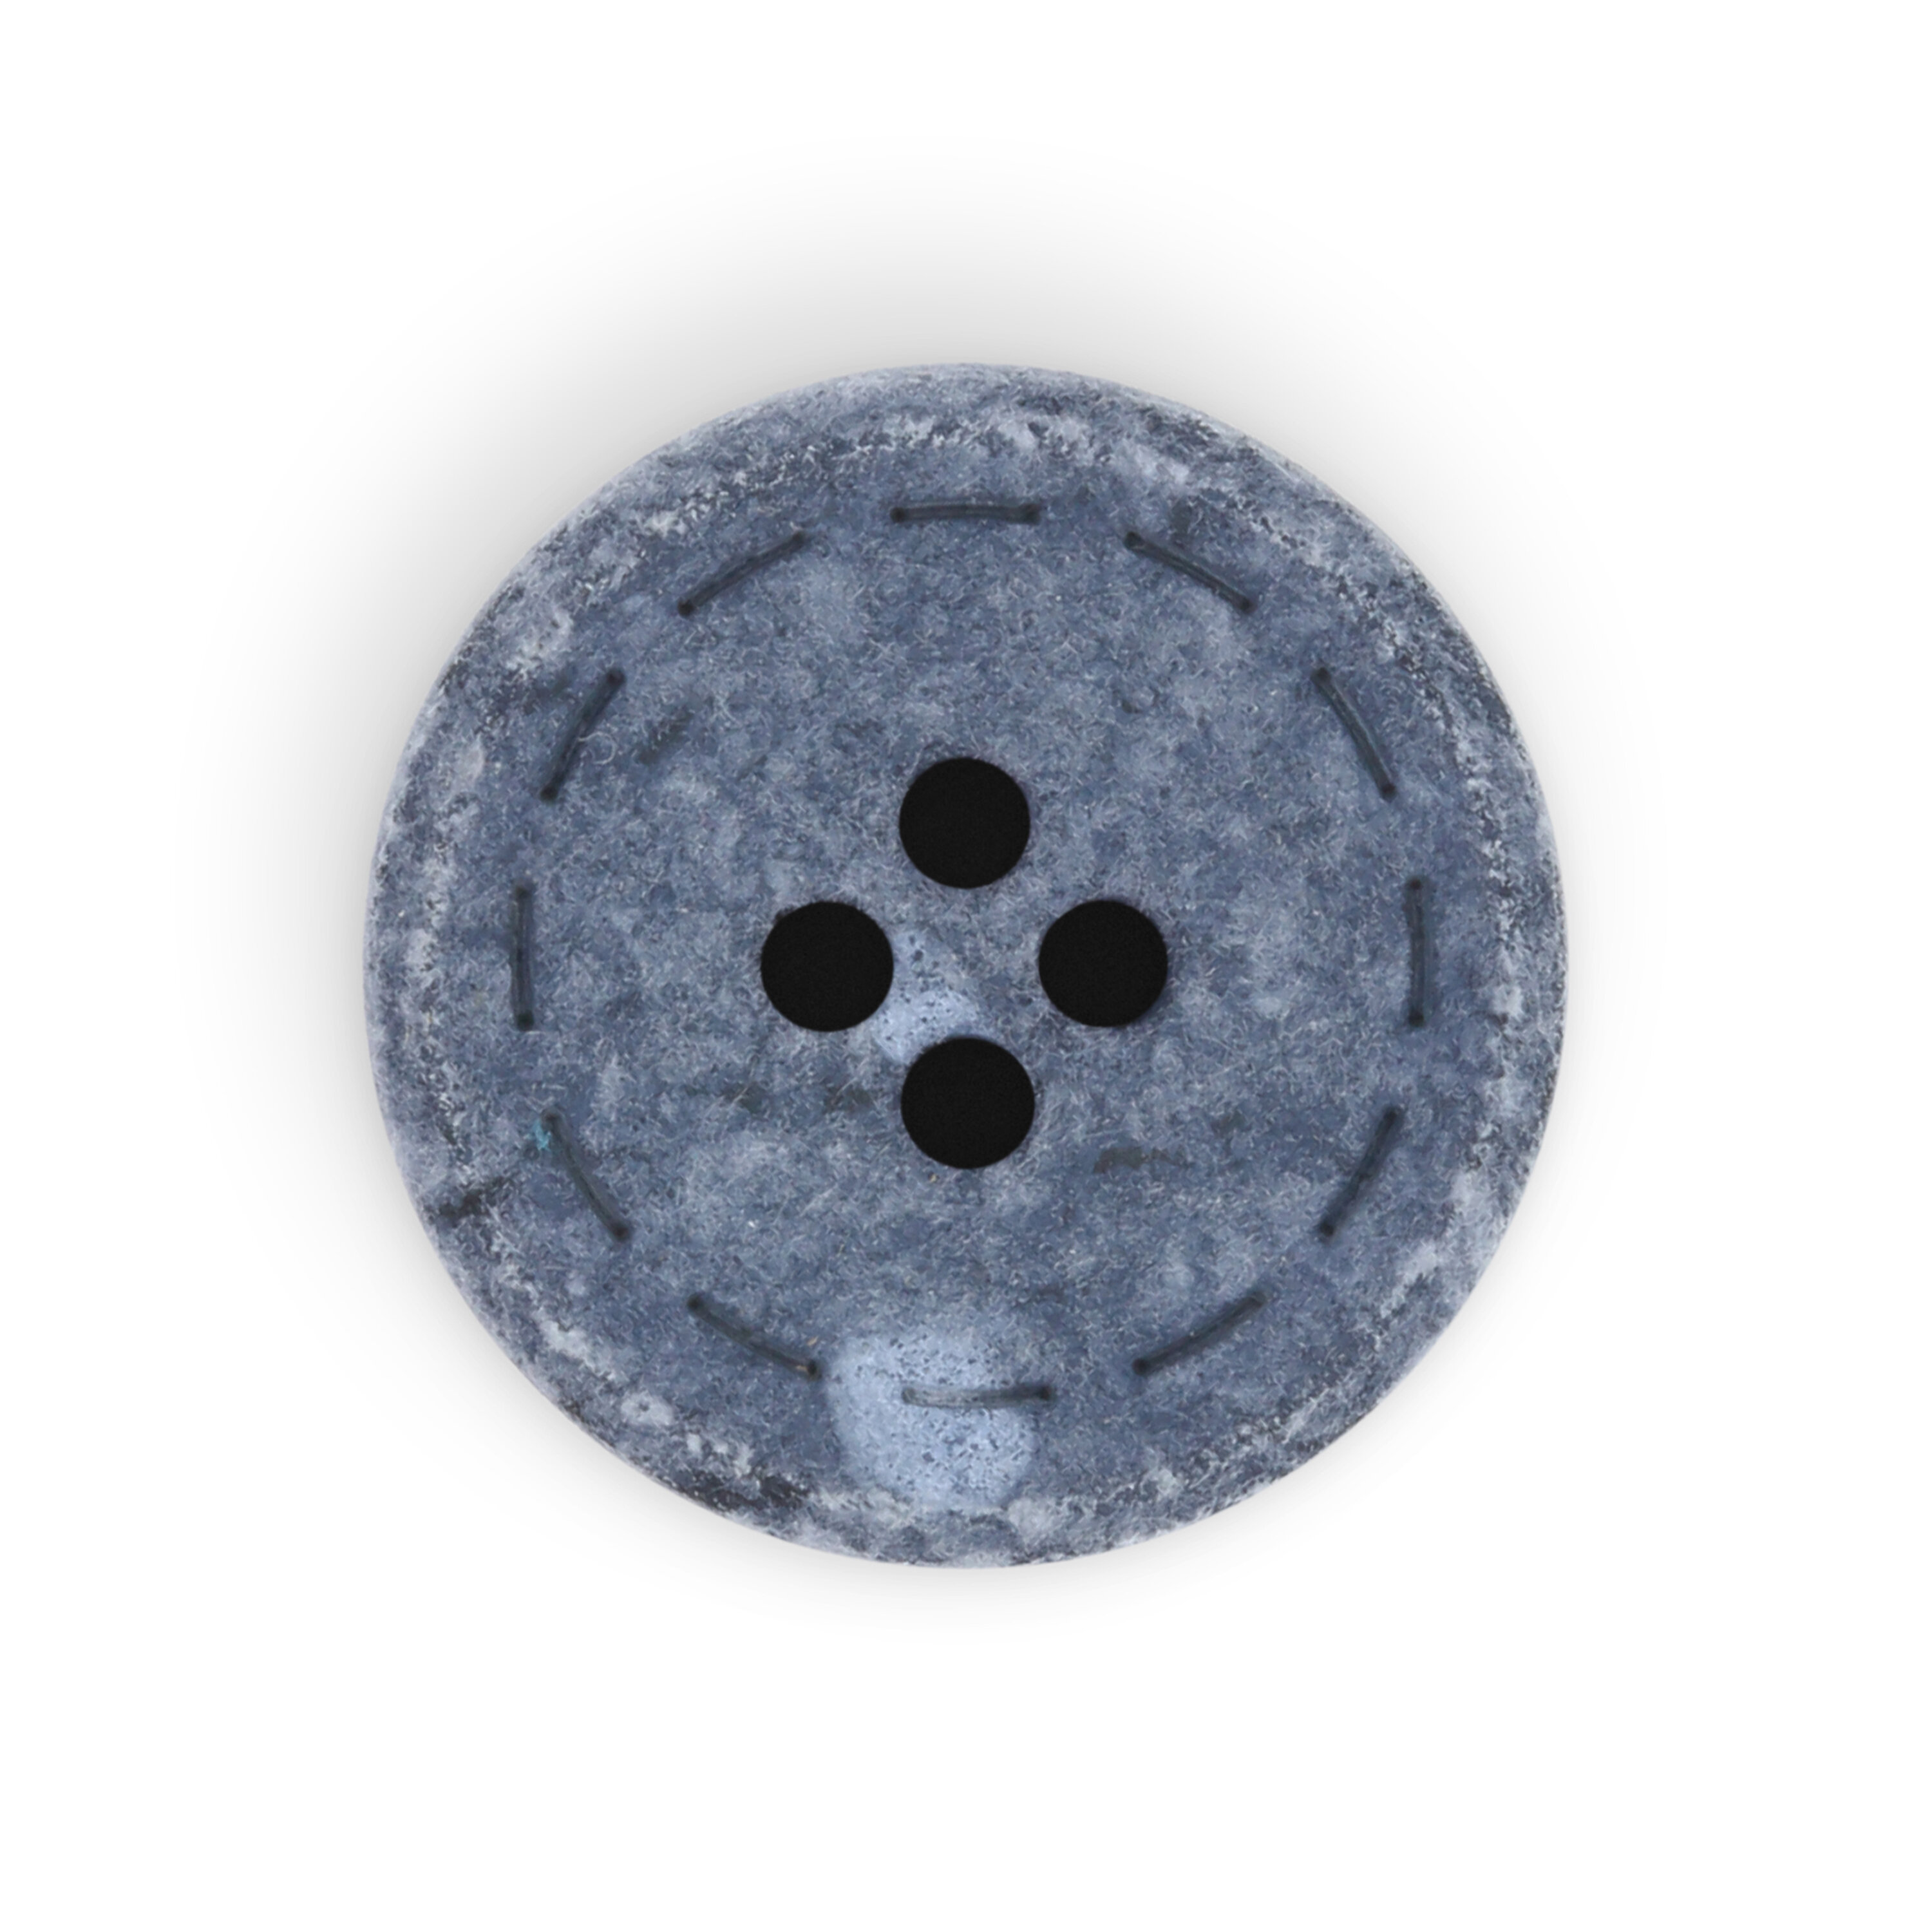 Dritz Recycled Cotton Round Stitch Button, 20mm, Blue, 9 Buttons